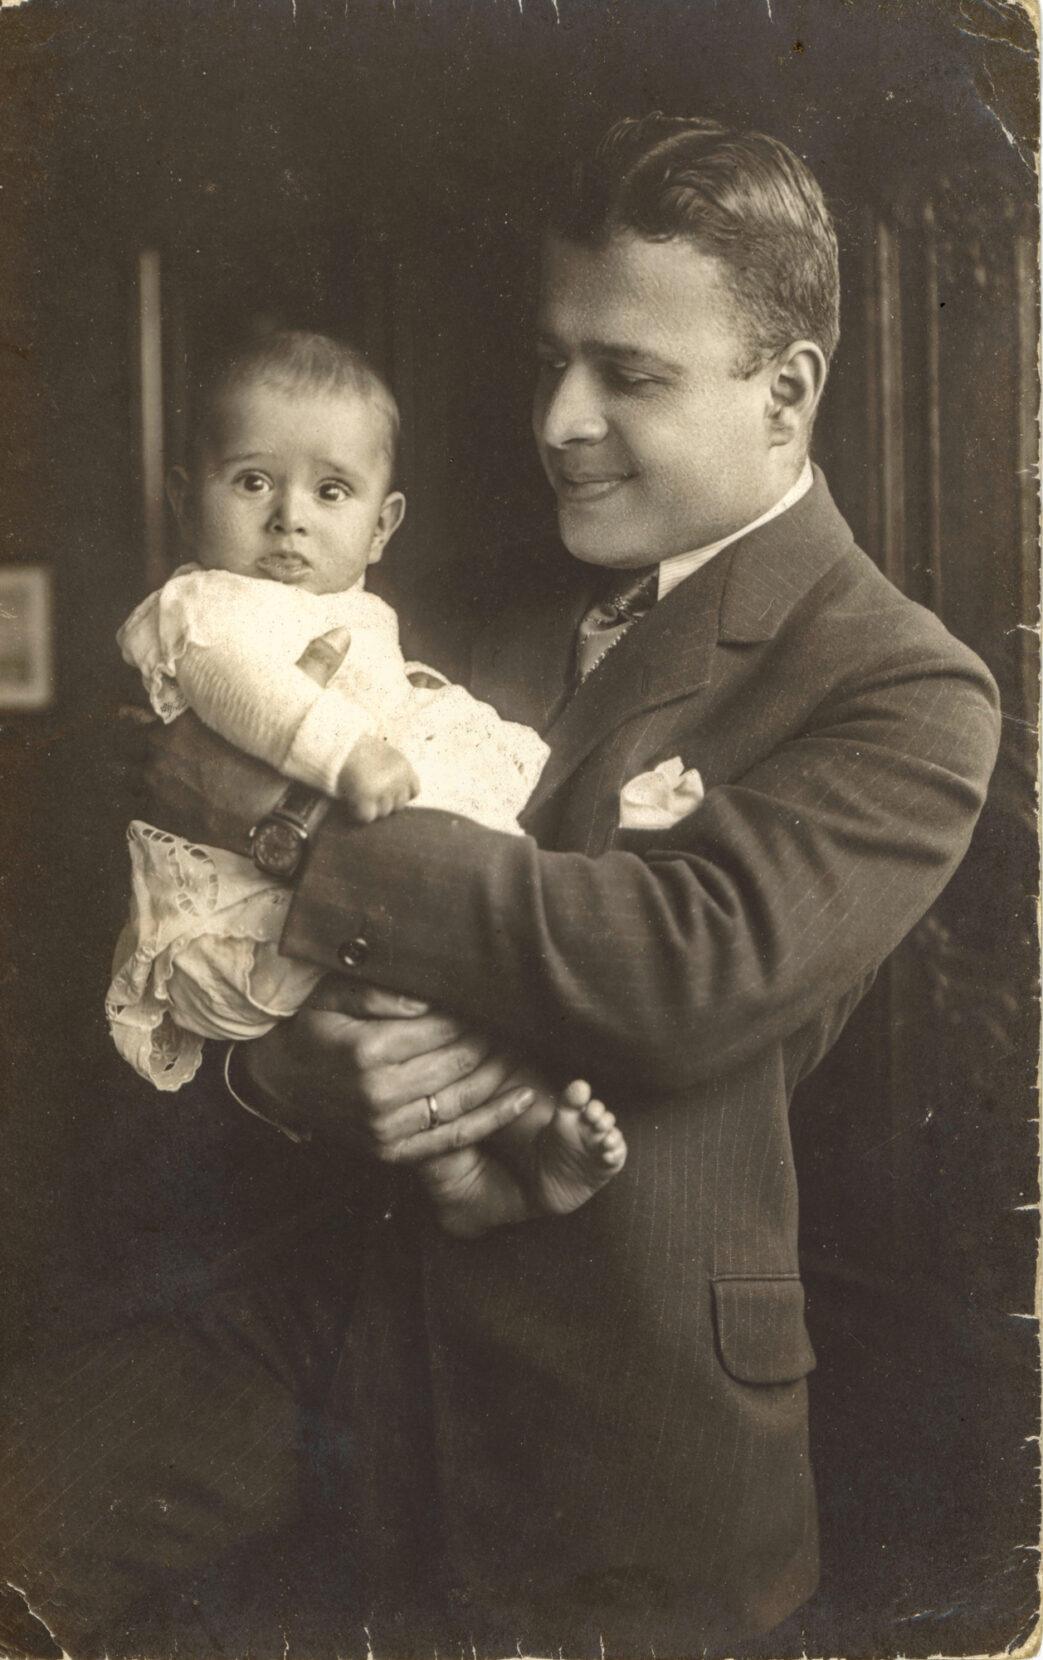 A black and white portrait of a man in a suit holding and admiring a baby.